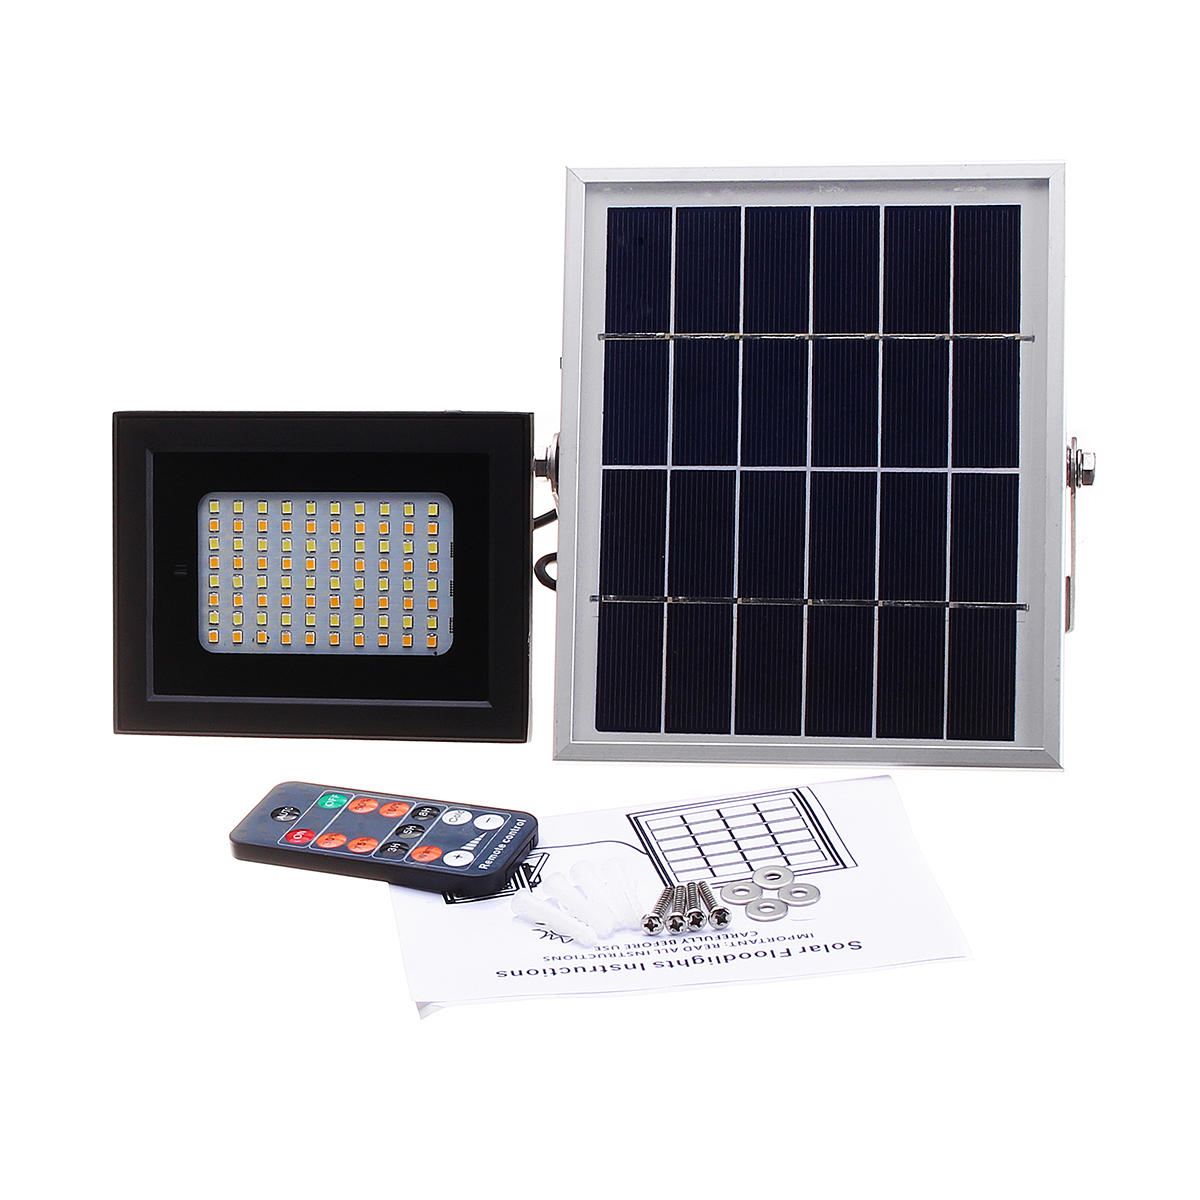 10W 80 LED Solar Power Light Outdoor Camping Tent Lantern Waterproof Remote Control Wall Lamp